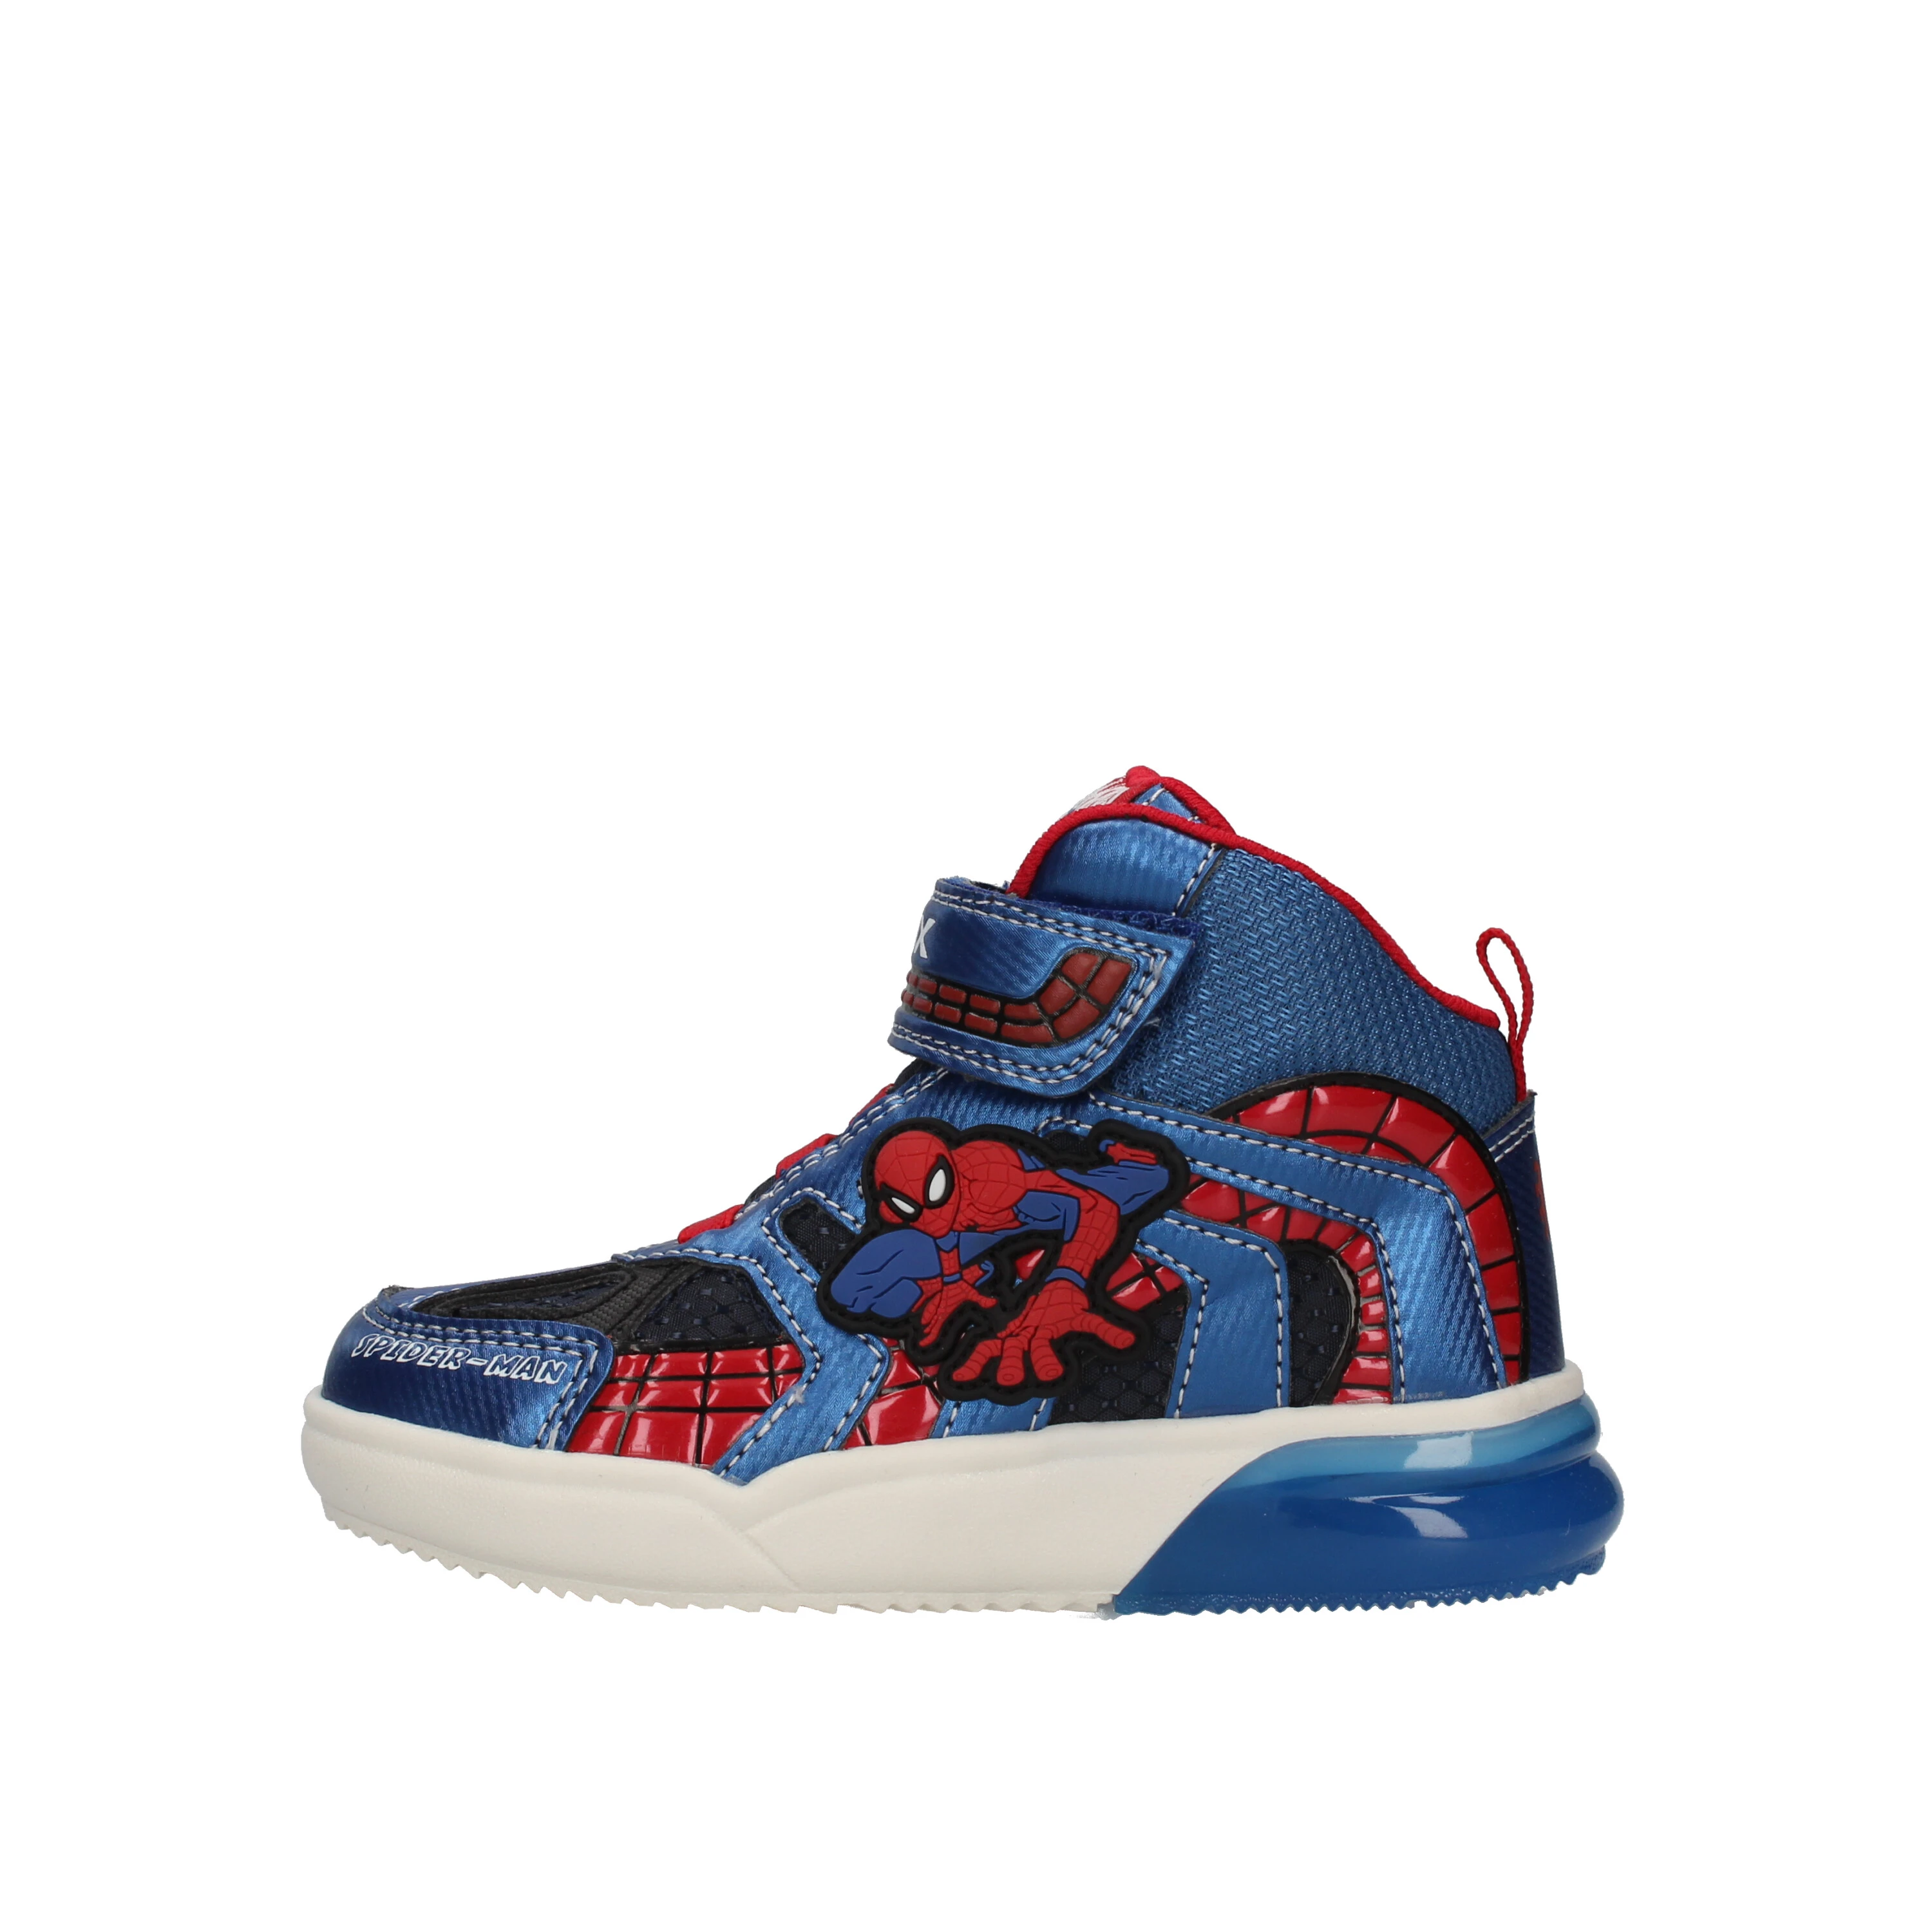 SNEAKERS MARVEL SPIDERMAN CON LUCI